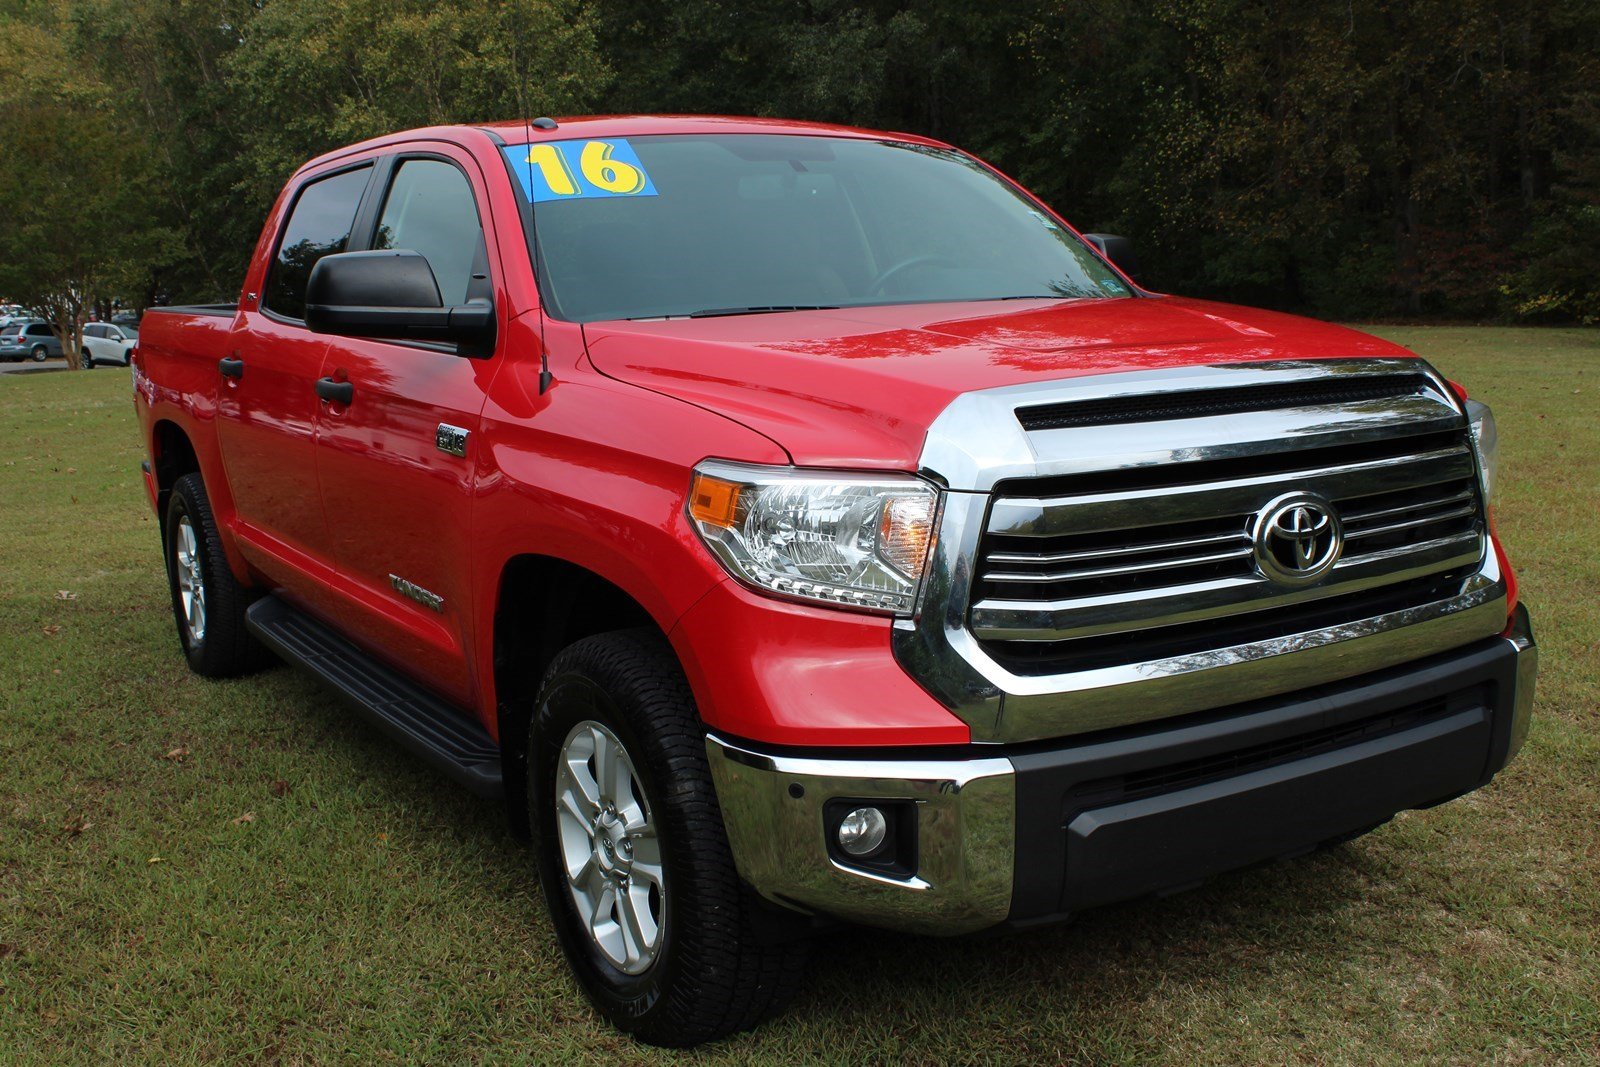 Pre-Owned 2016 Toyota Tundra 4WD Truck SR5 Crew Cab Pickup in